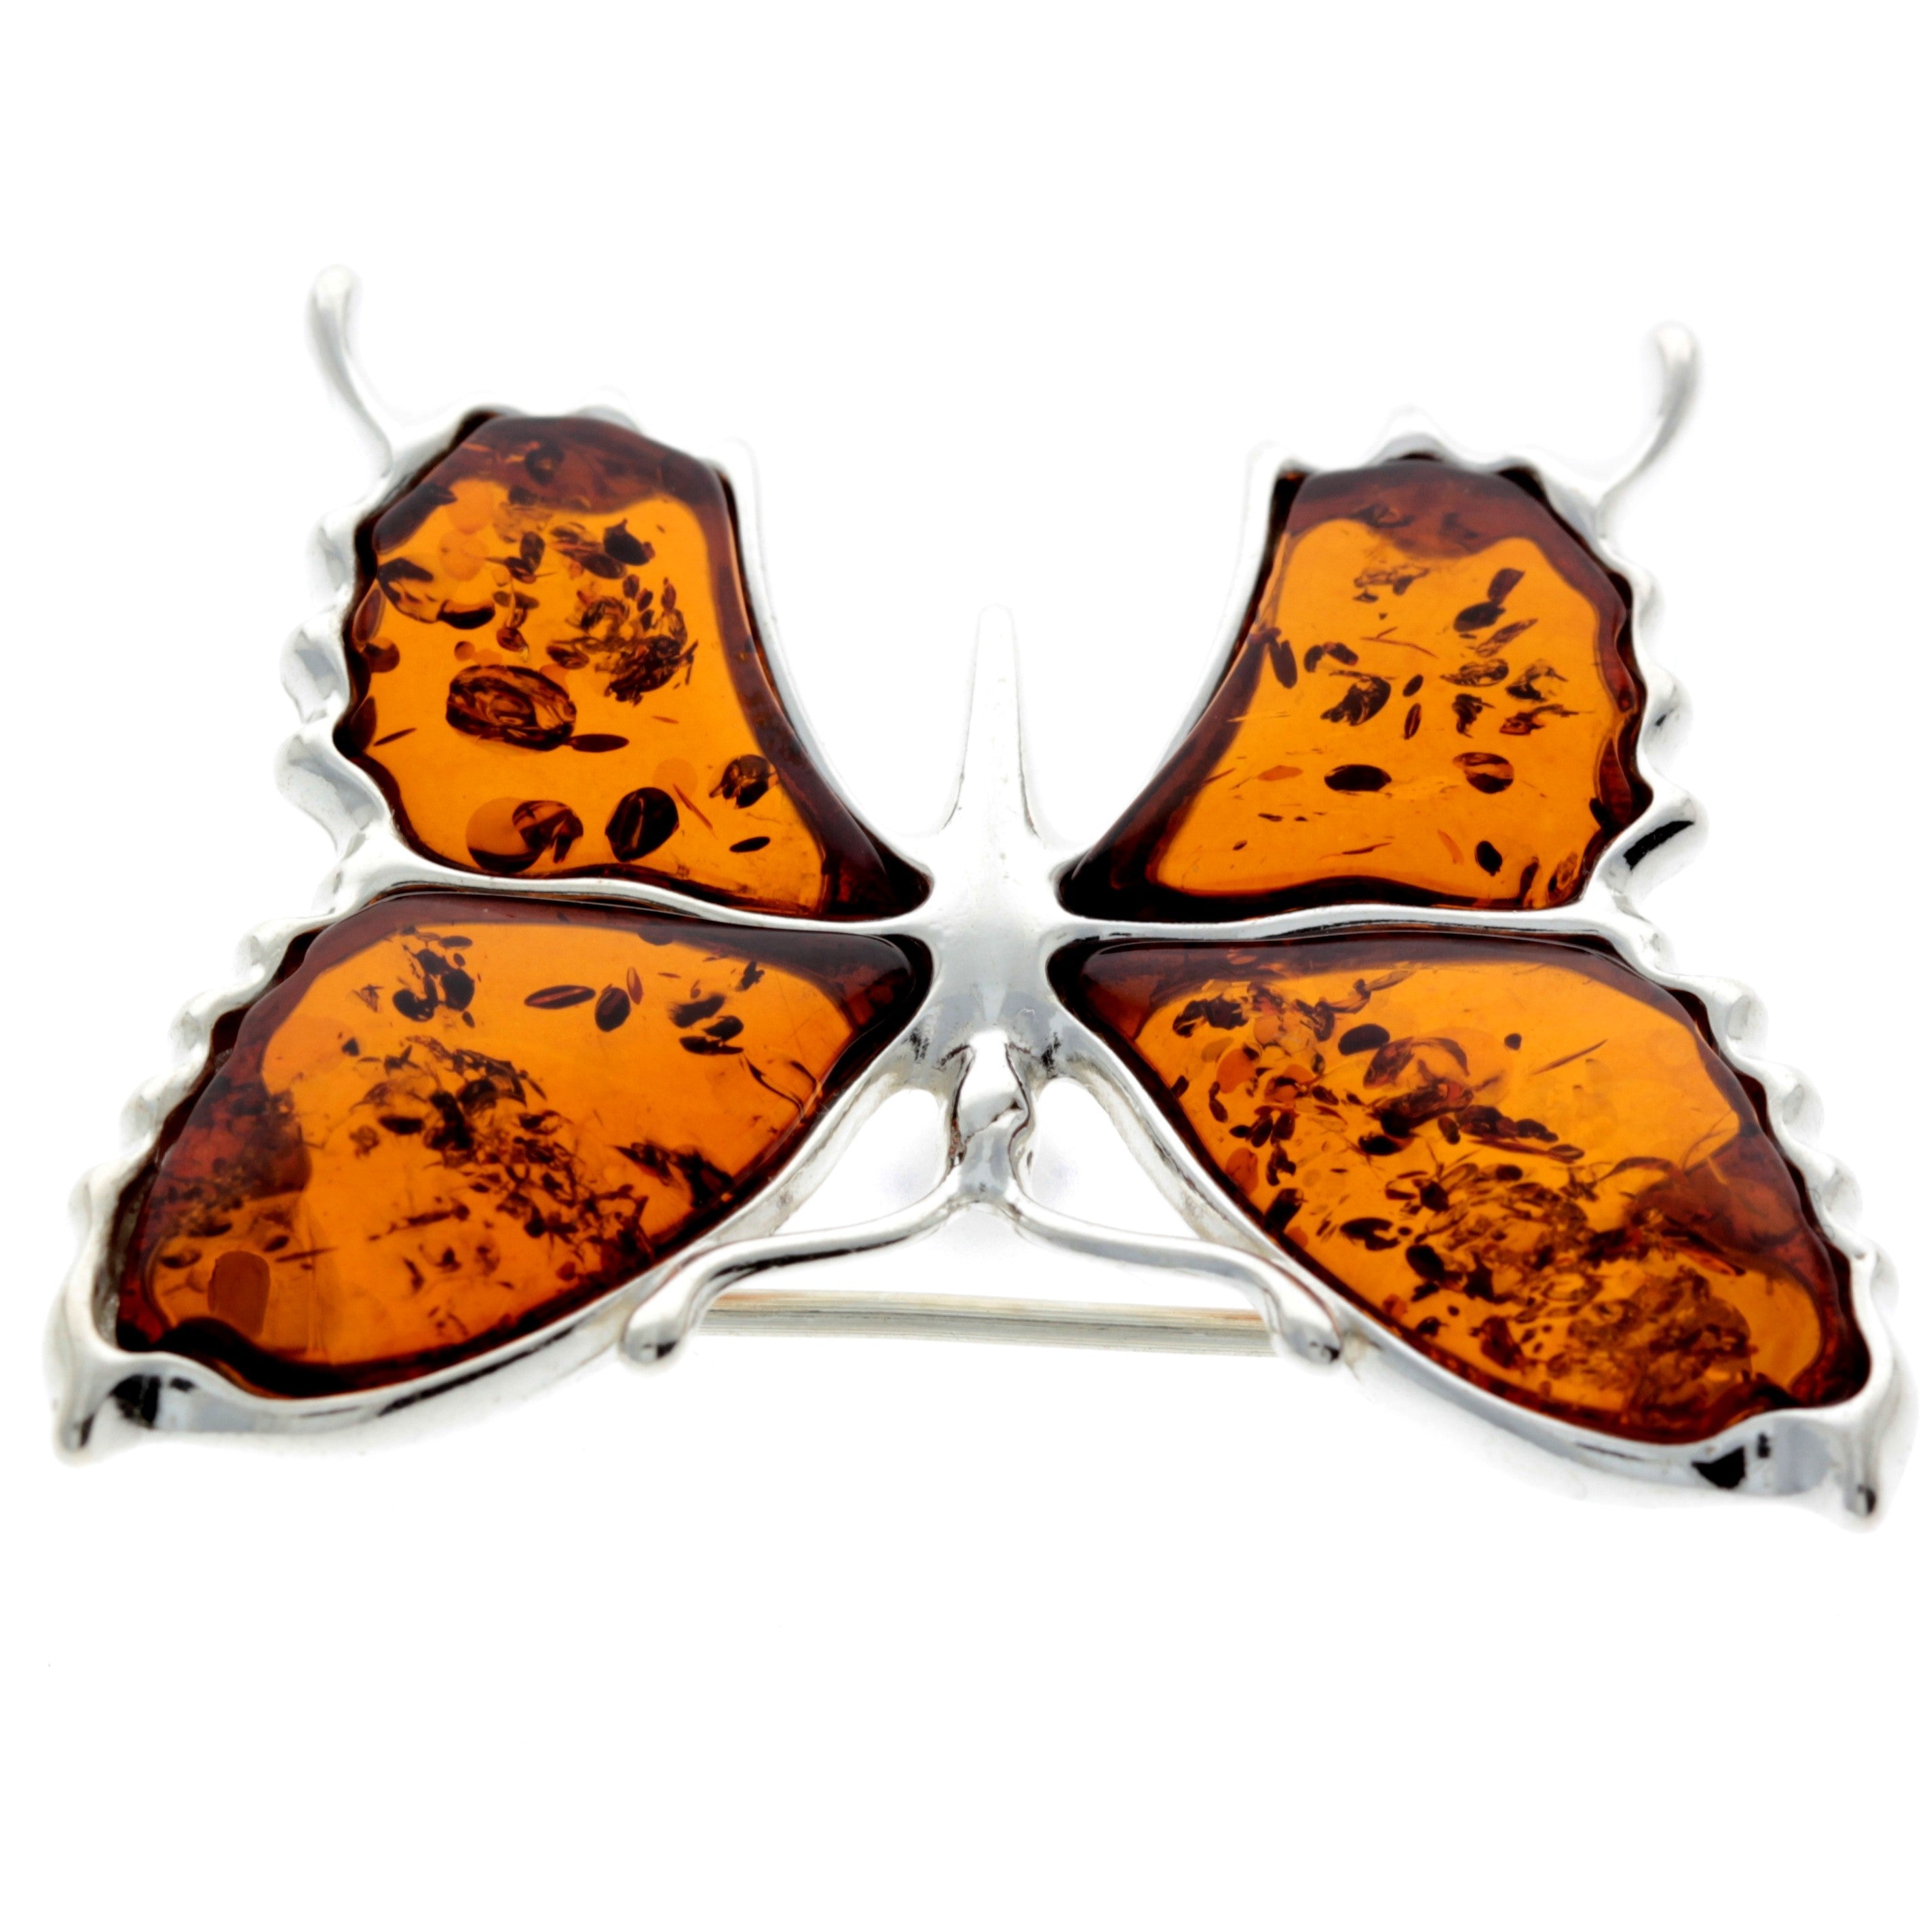 925 Sterling Silver & Baltic Amber Exclusive Large Butterfly Brooch - AD800